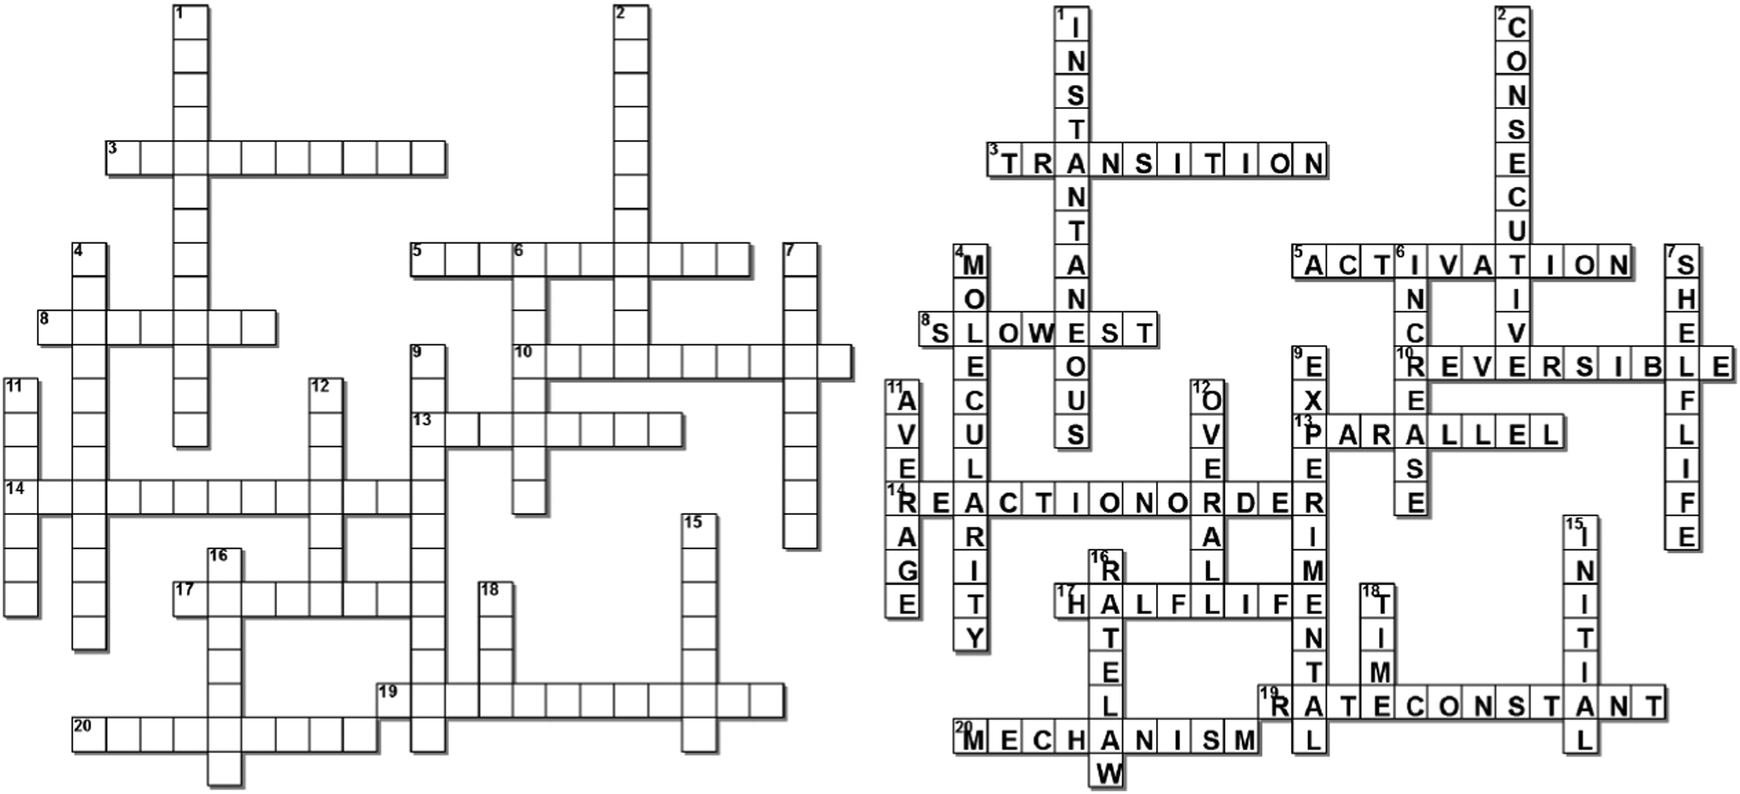 Crossword puzzles for chemistry education: learning goals beyond